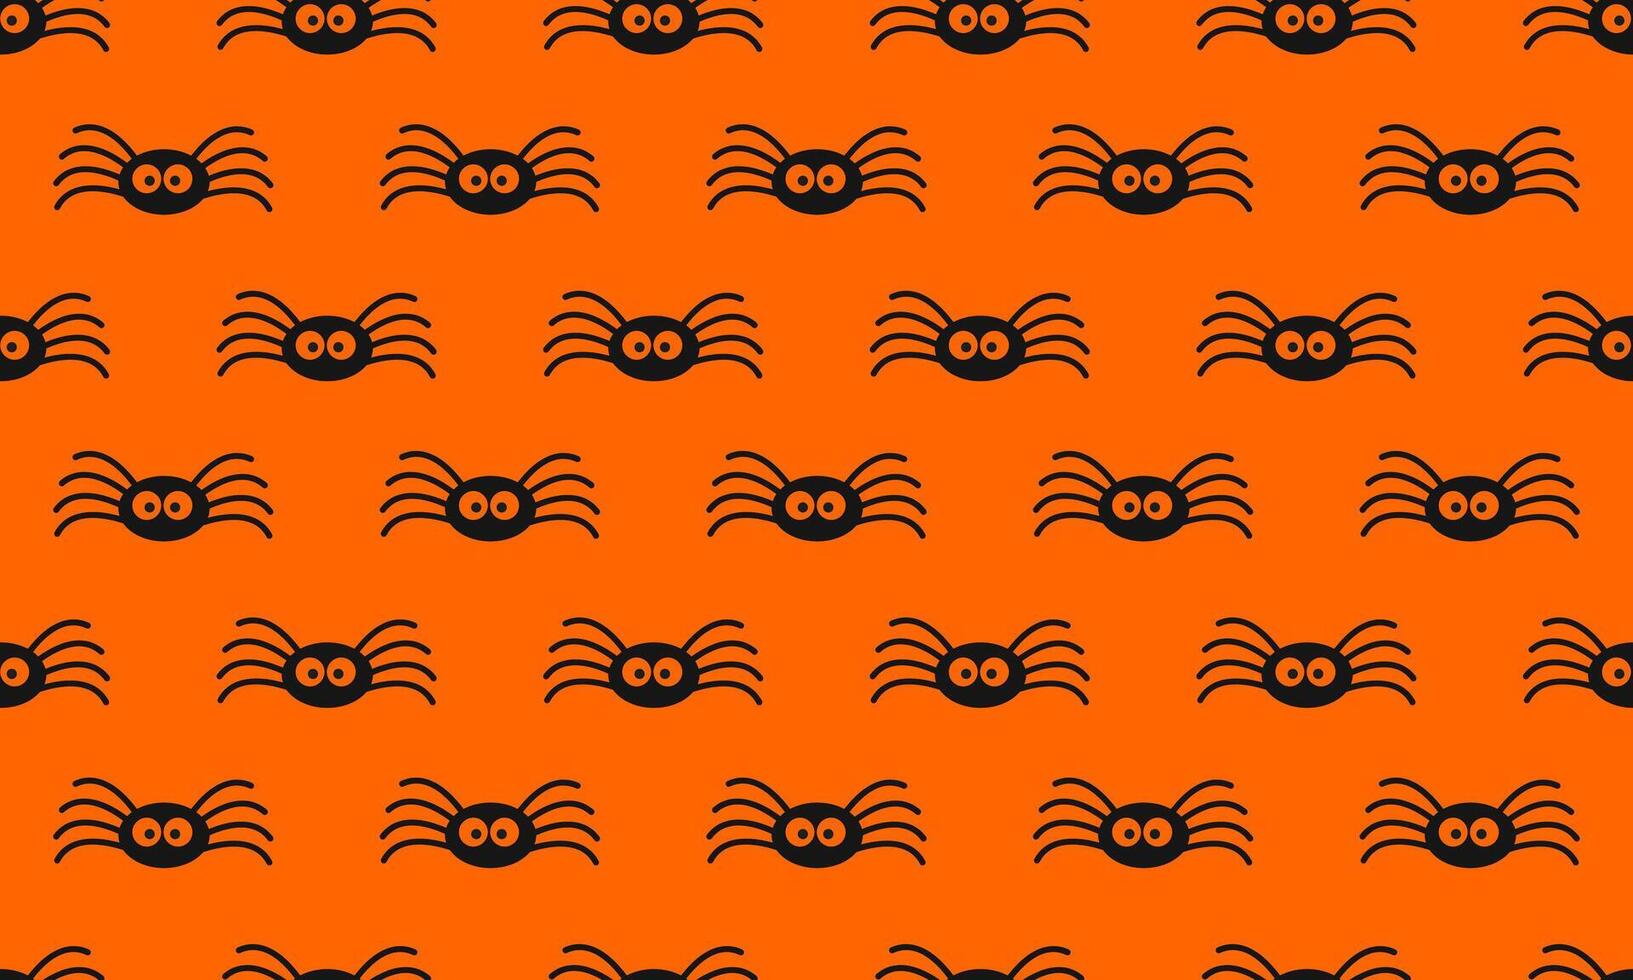 Cute little black spiders on orange background. Halloween party seamless pattern. Scrapbooking or wrapping paper, fabric design, textile print vector